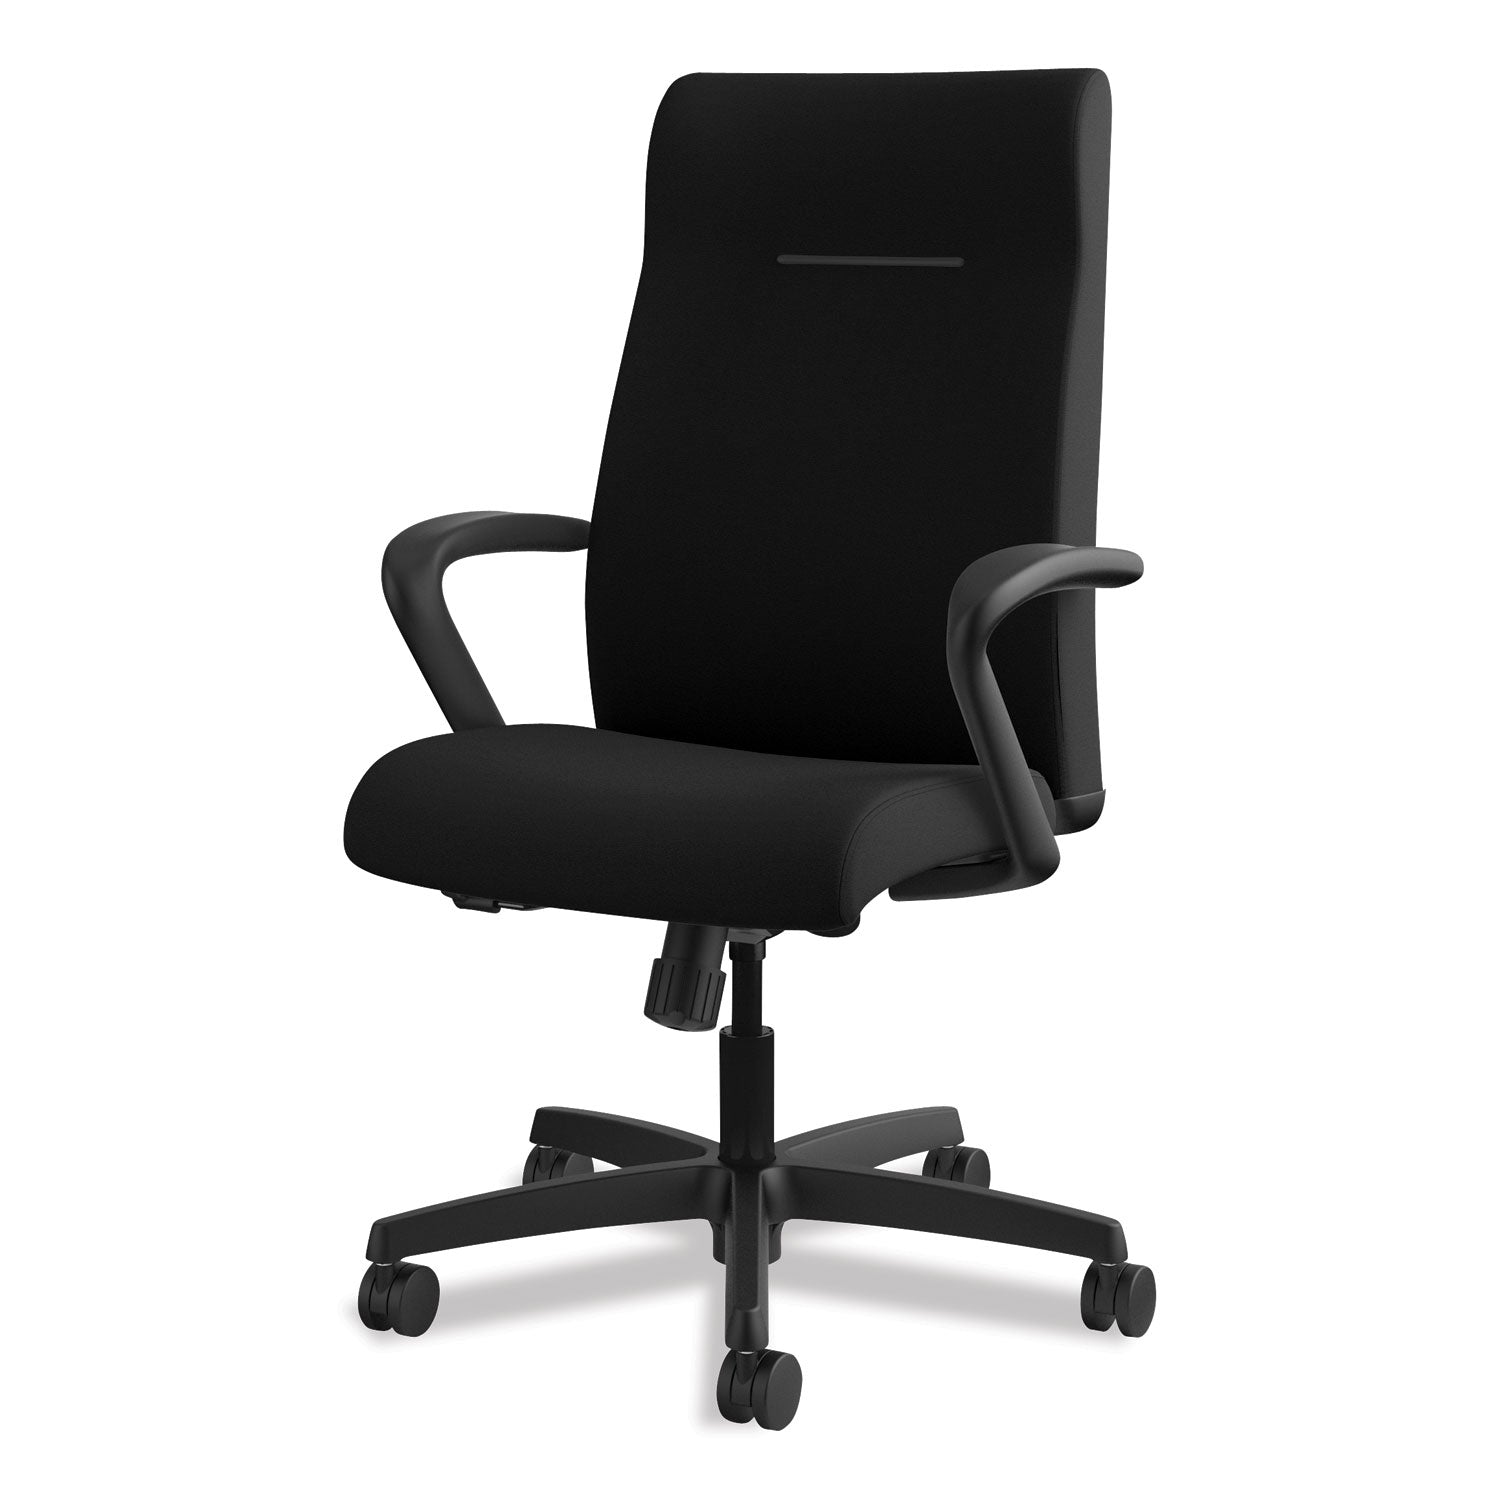 ignition-series-executive-high-back-chair-supports-up-to-300-lb-17-to-21-seat-height-black_honie102cu10 - 3